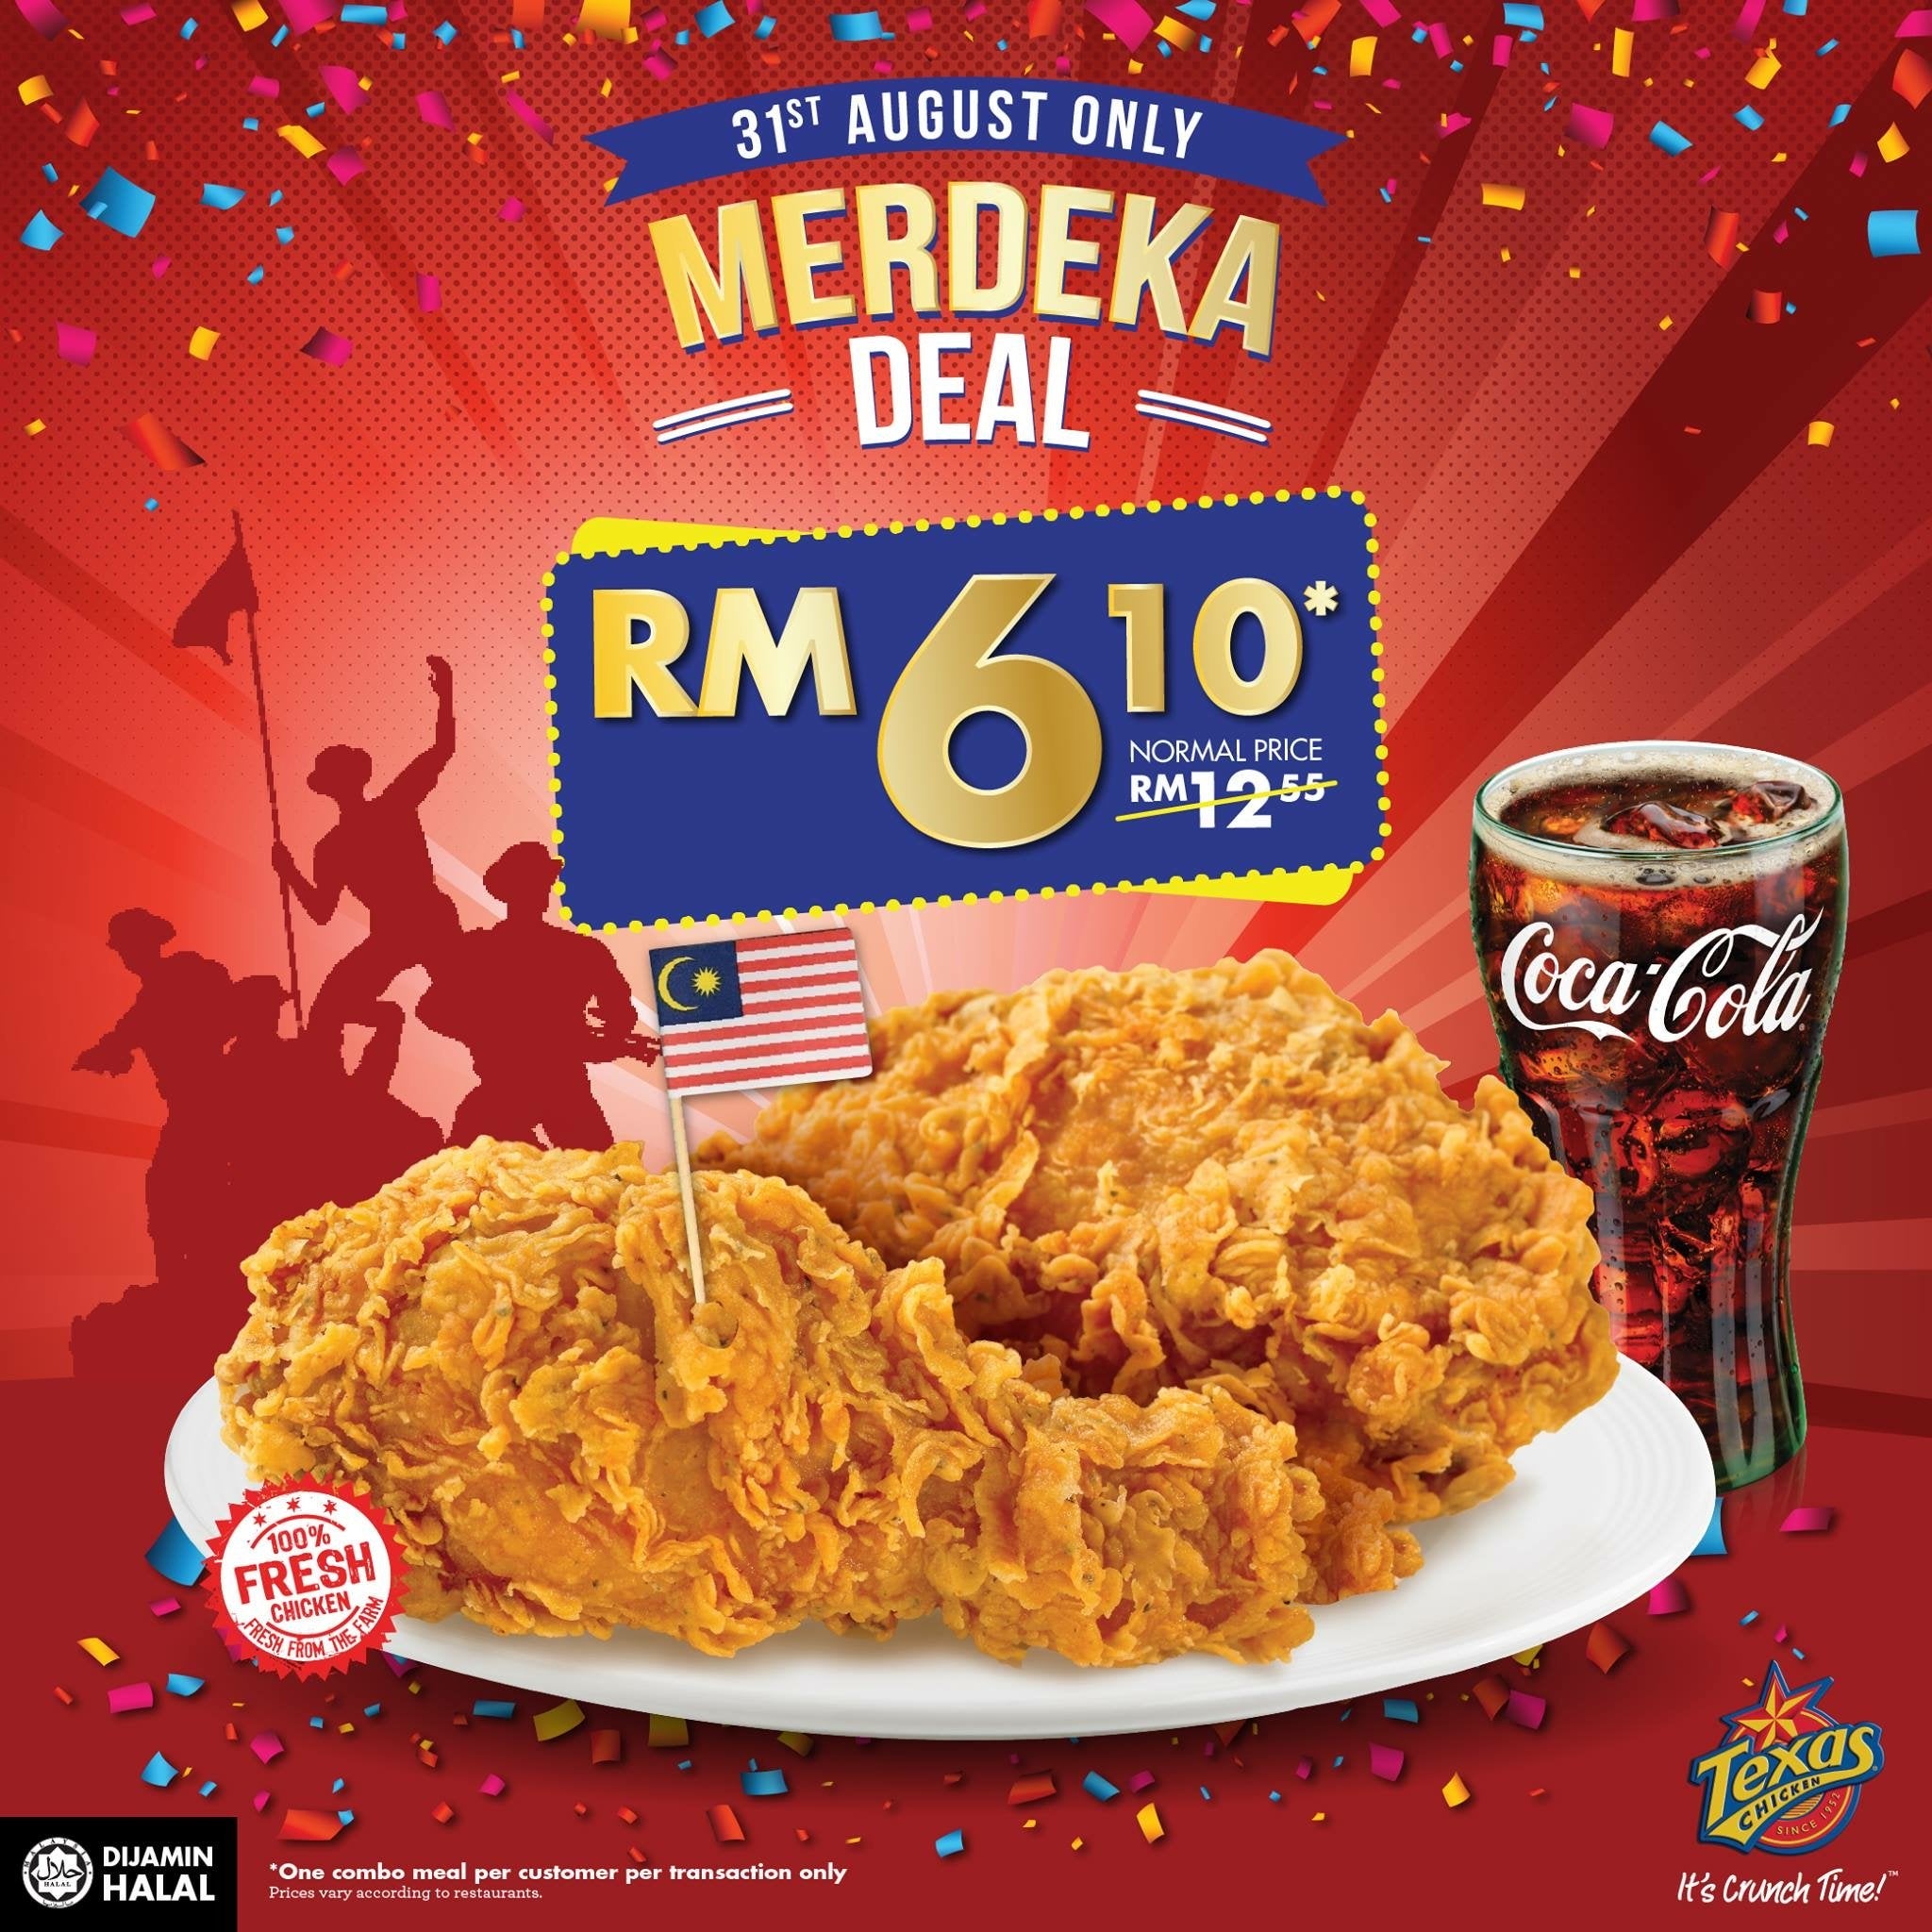 Here Are Some Great F&B Offers You Can Get This Merdeka! - WORLD OF BUZZ 2